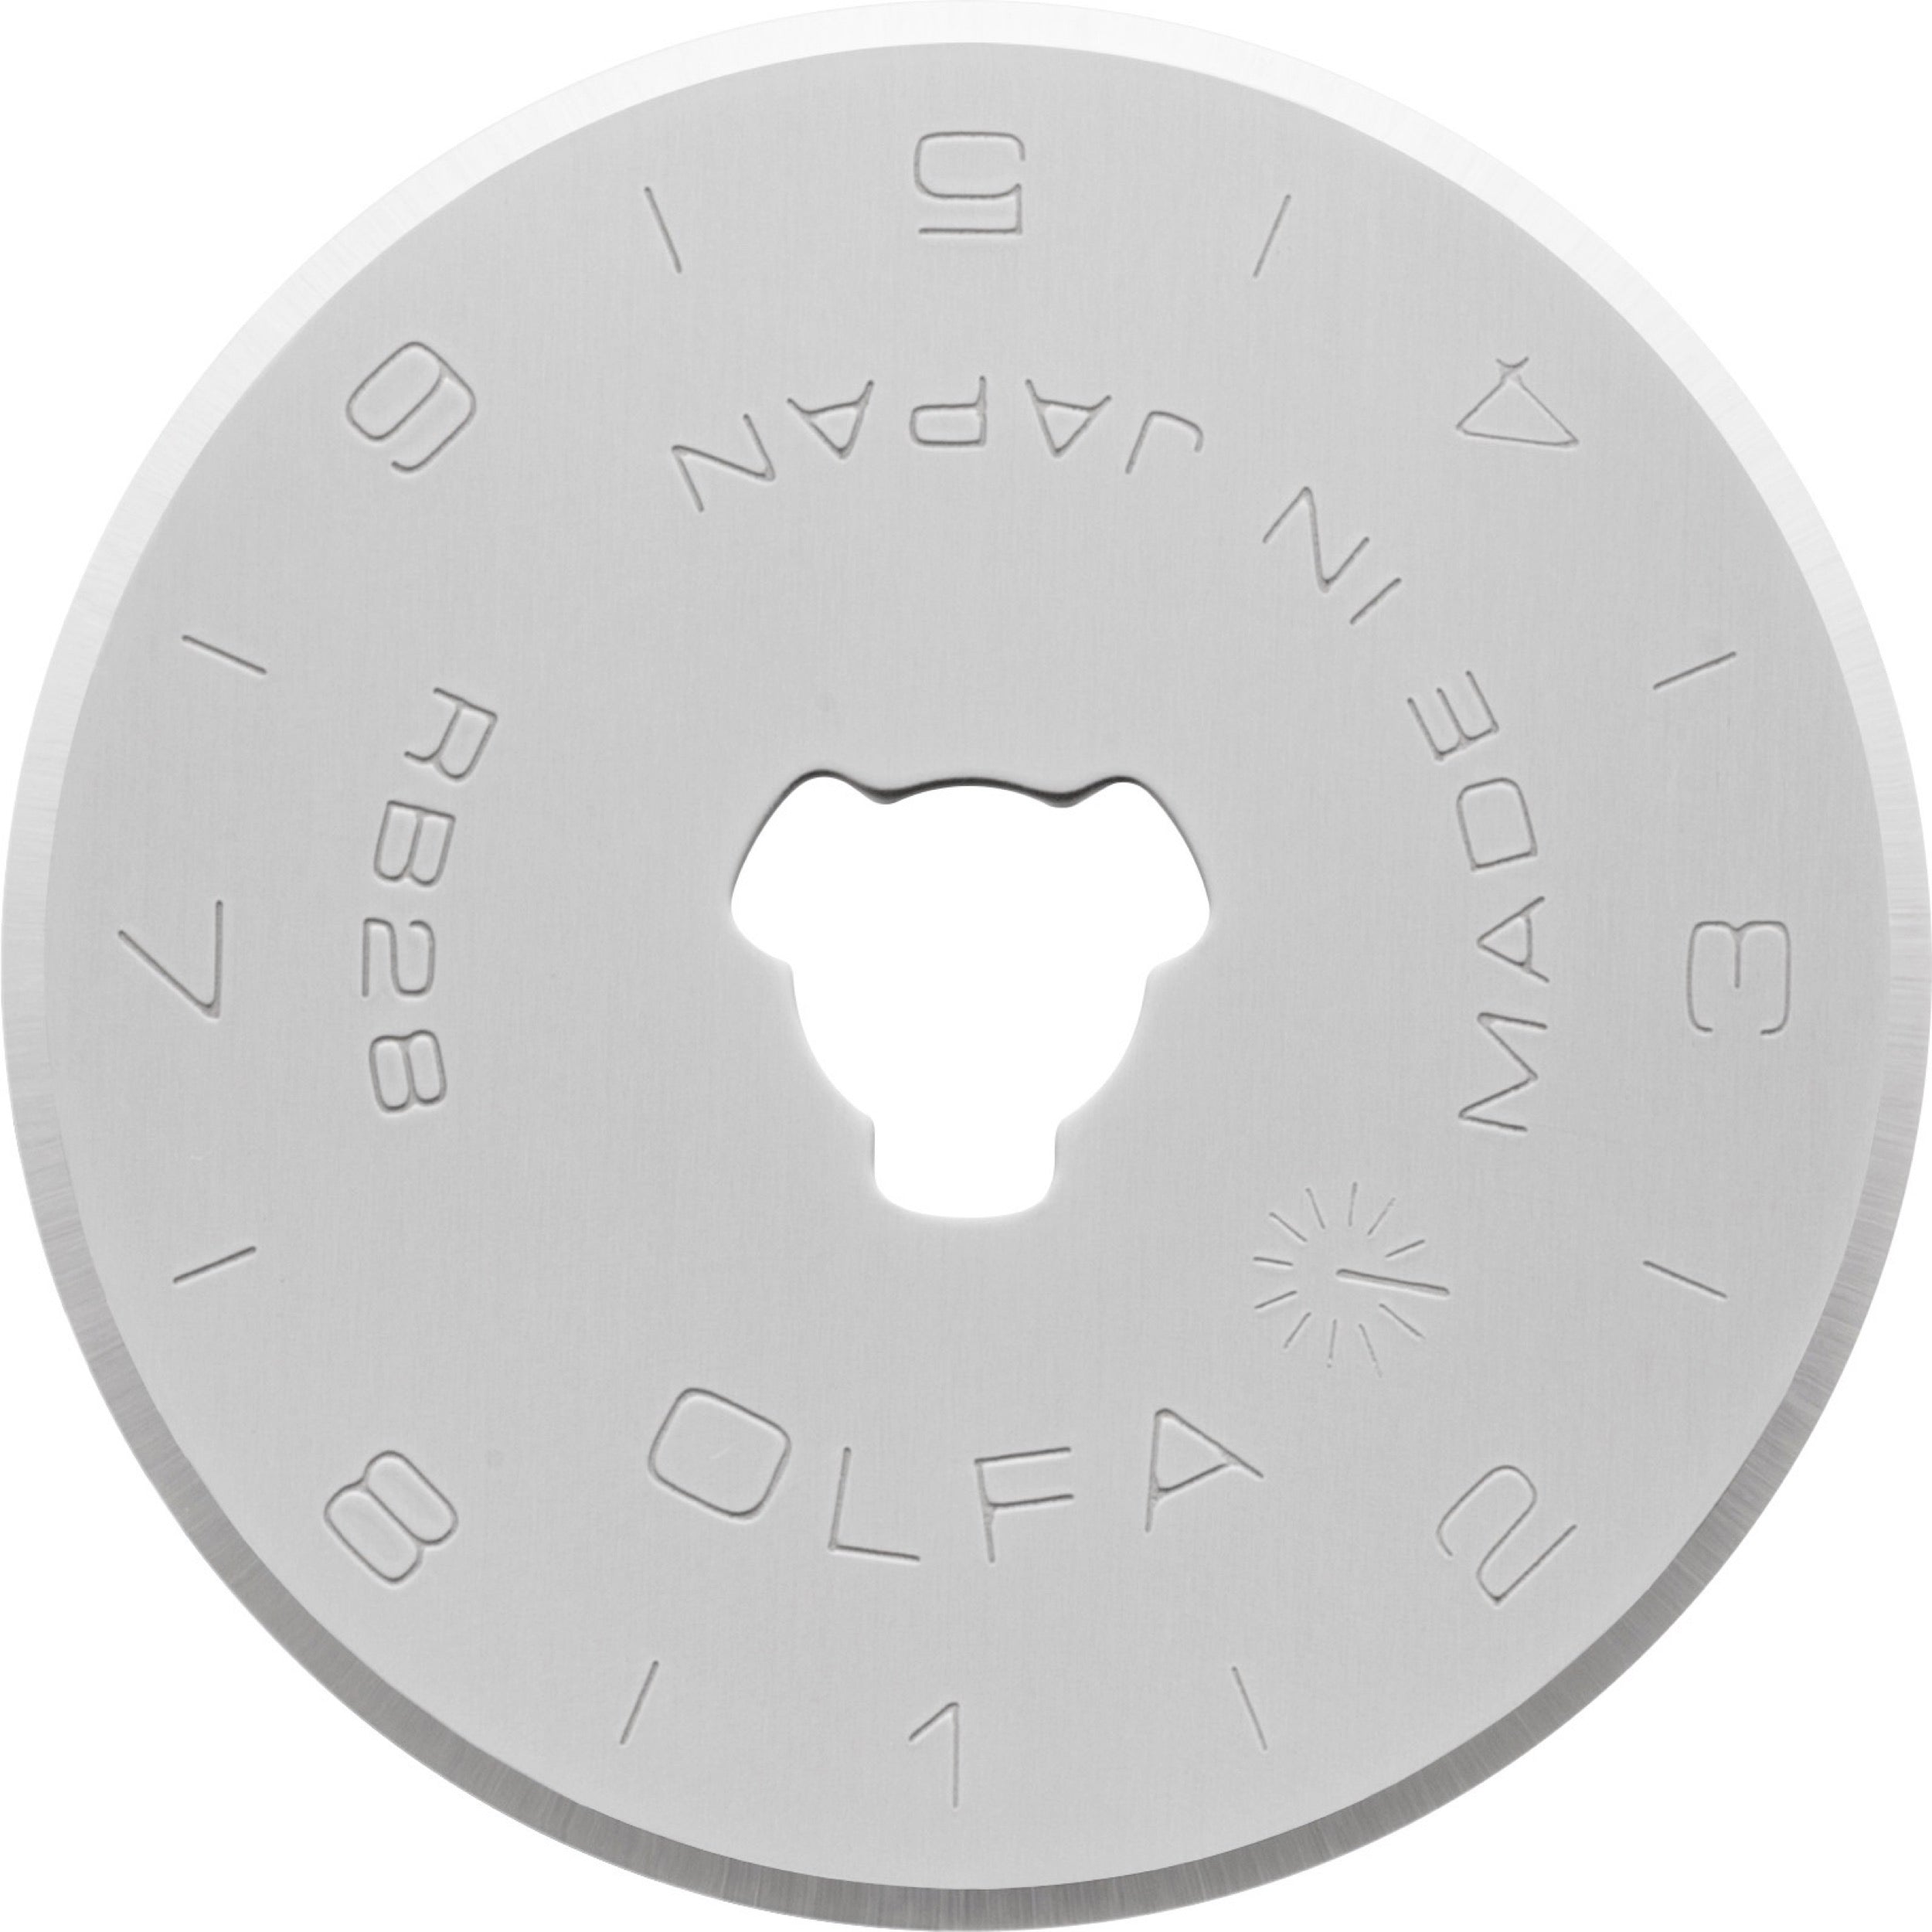 OLFA replacement blade for 28mm rotary cutter RB28-2